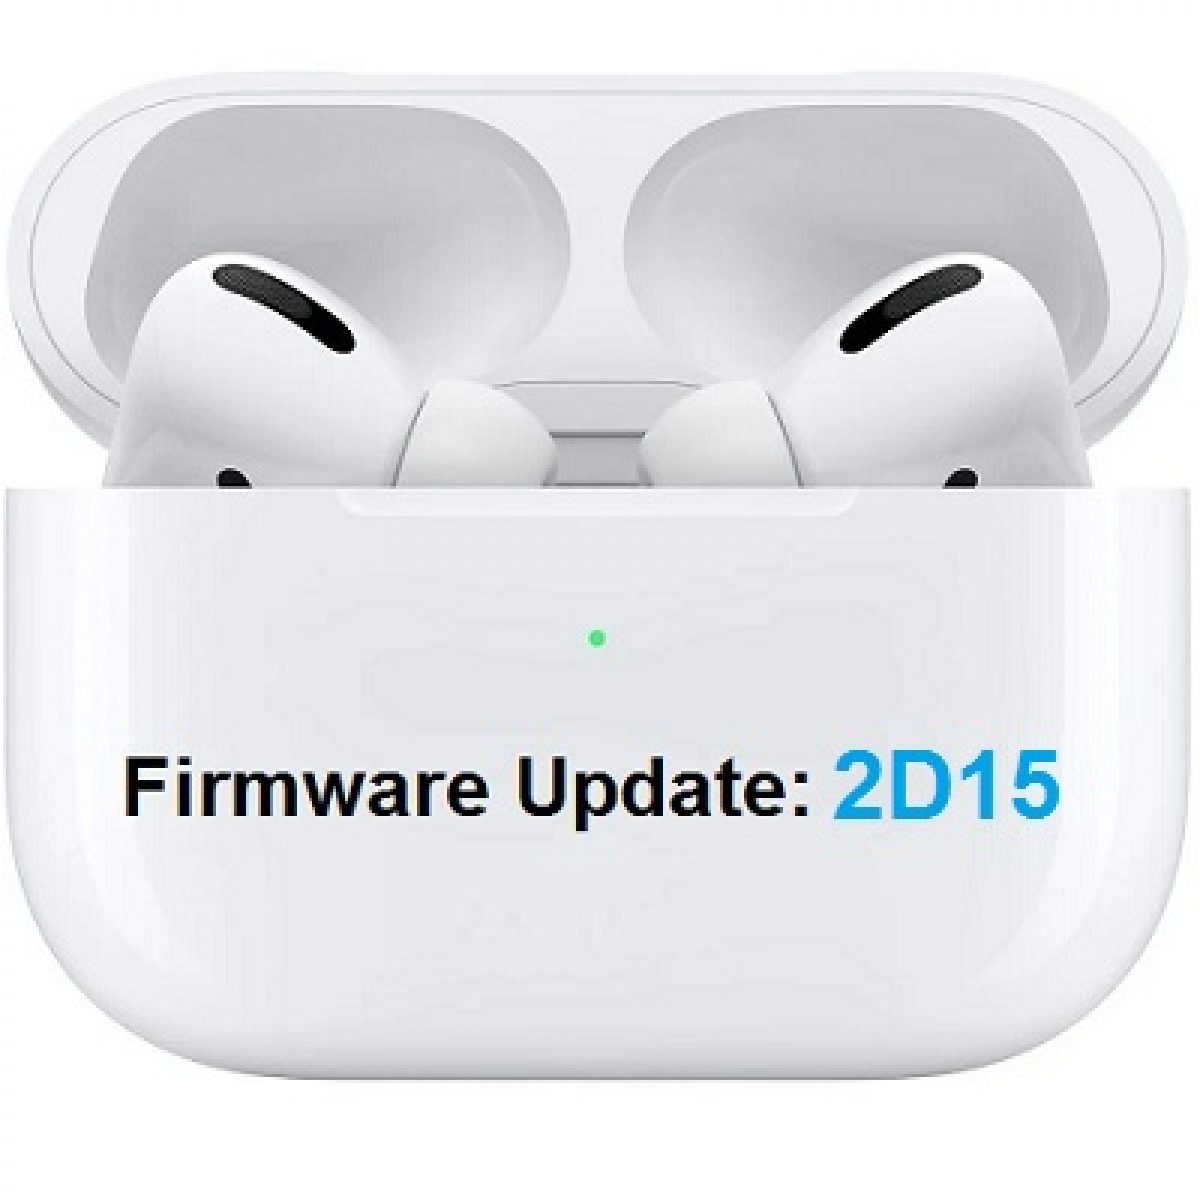 How To Update AirPods Firmware To 2D15